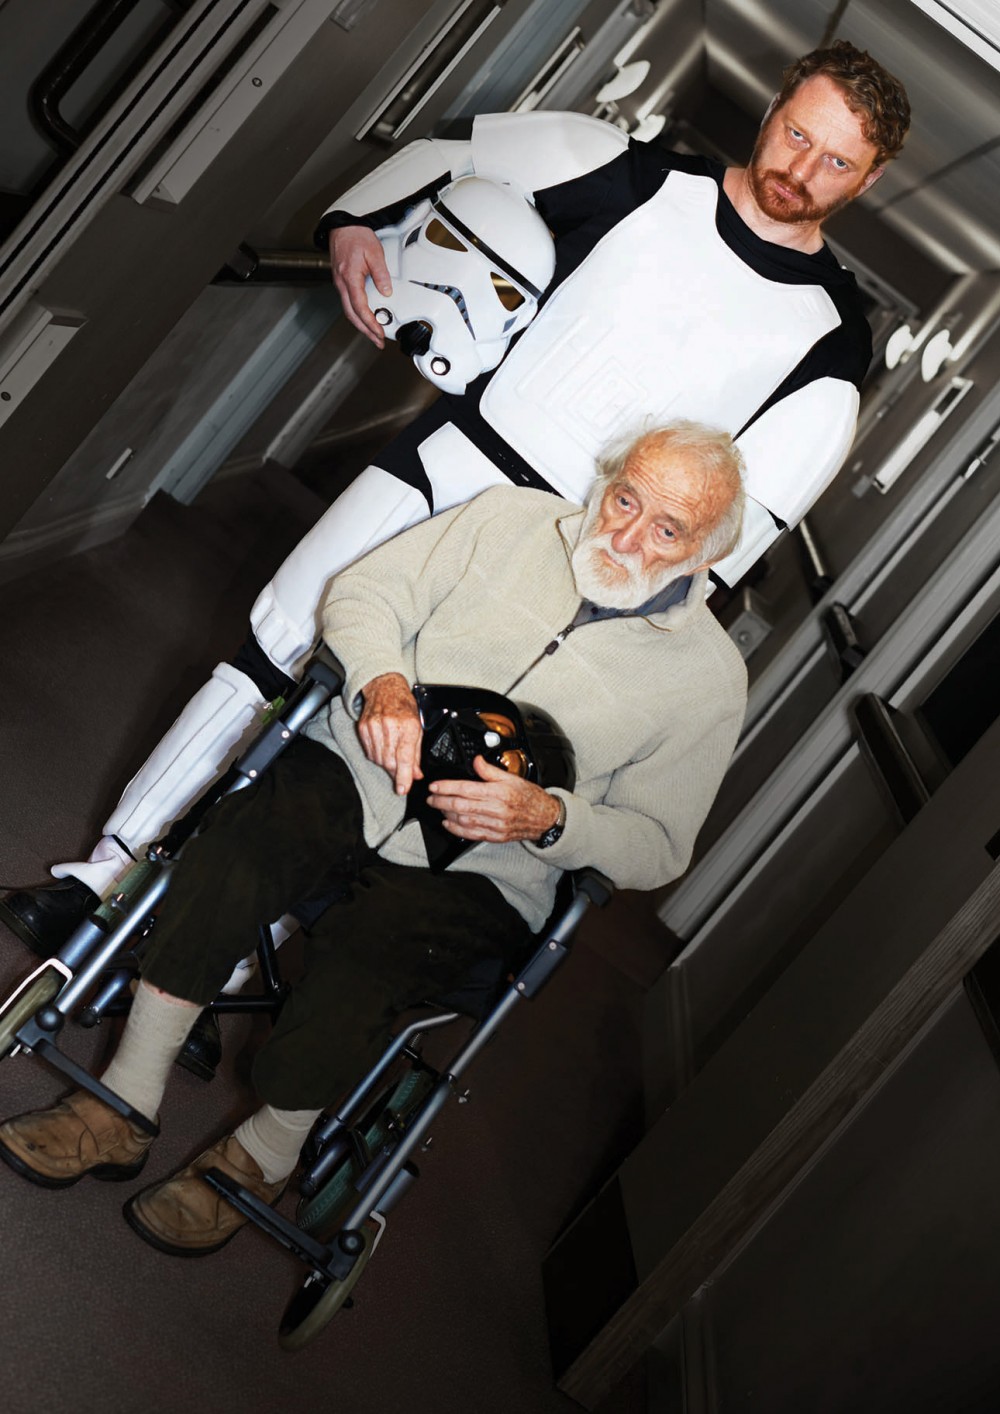 Kim Noble is dressed as a Storm Trooper, he is pushing an old man in a wheel chair towards the us.